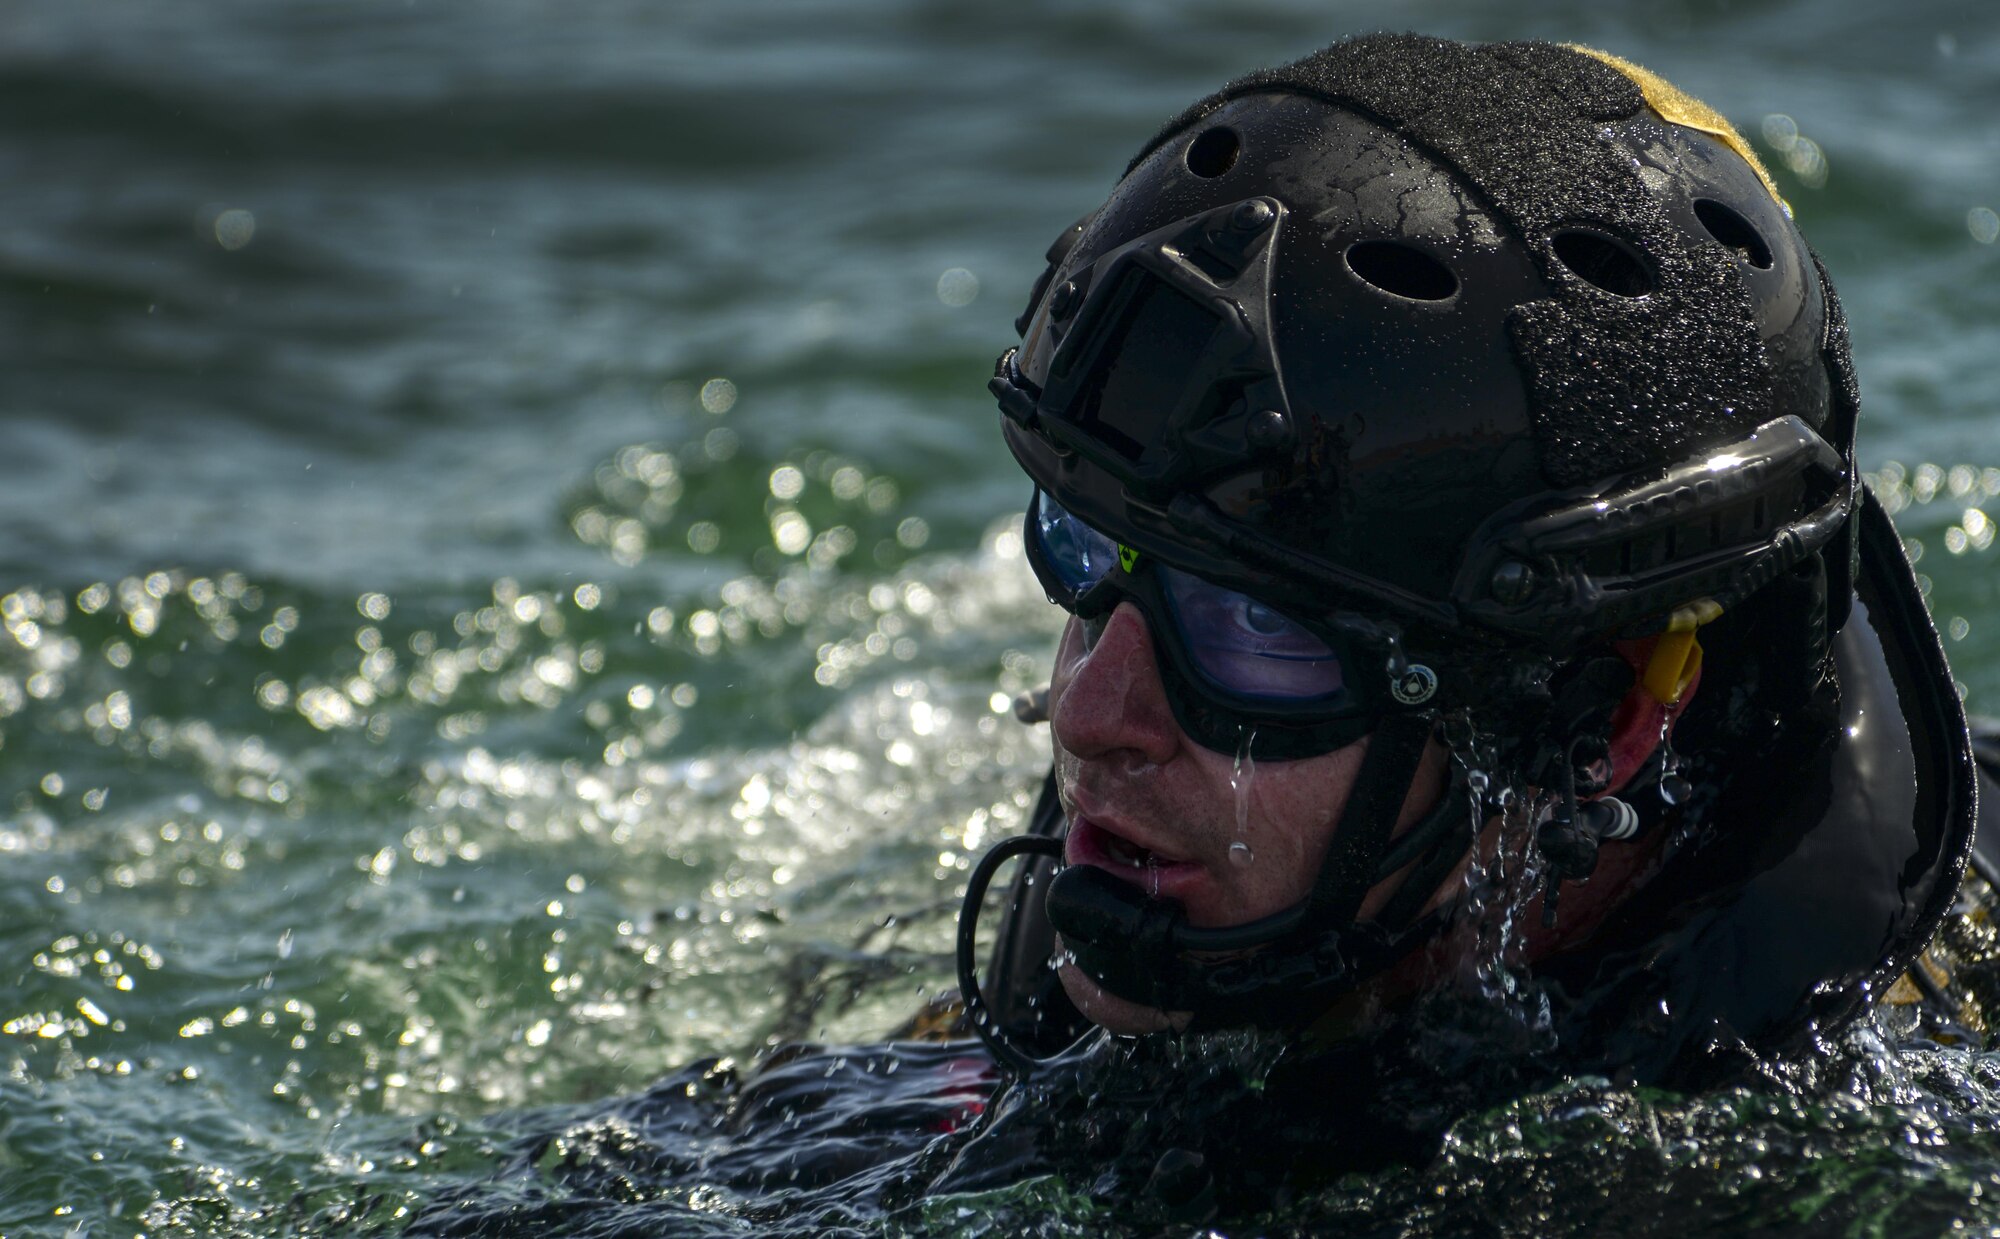 Capt. Daniel L Catino assigned to the 58th Rescue Squadron at Nellis Air Force Base, Nevada, waits to enter a rescue boat after preforming a static line jump out of a C-130 over Lake Mead, March 15, 2016. The mission of the Pararescue is to rescue, recover, and return American or Allied forces in times of danger or extreme duress. (U.S. Air Force photo by Airman 1st Class Kevin Tanenbaum)